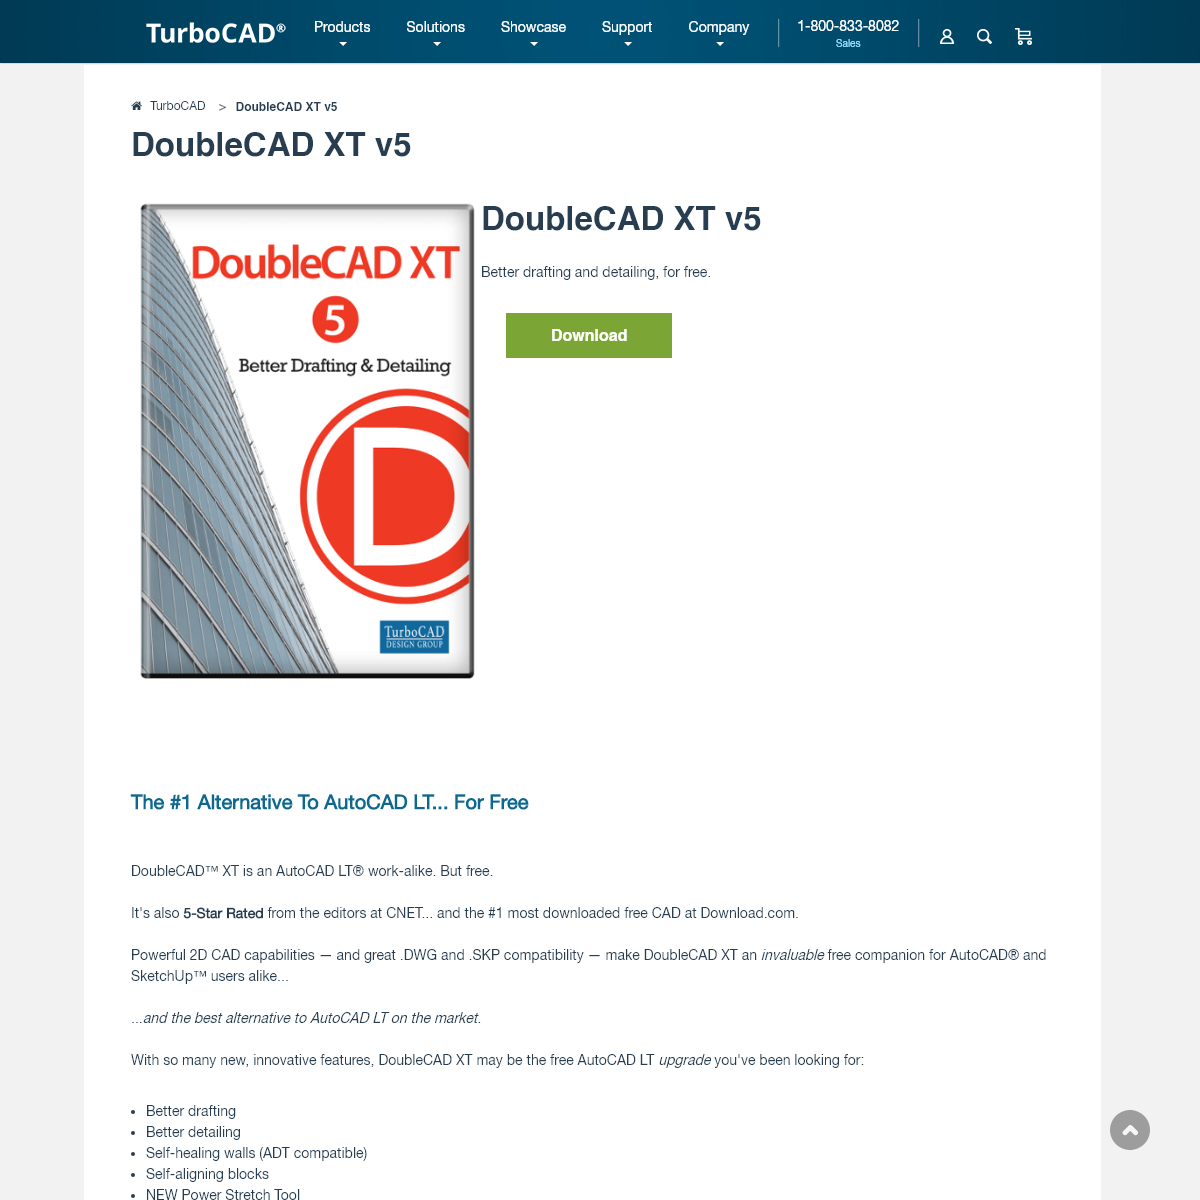 A complete backup of doublecad.com